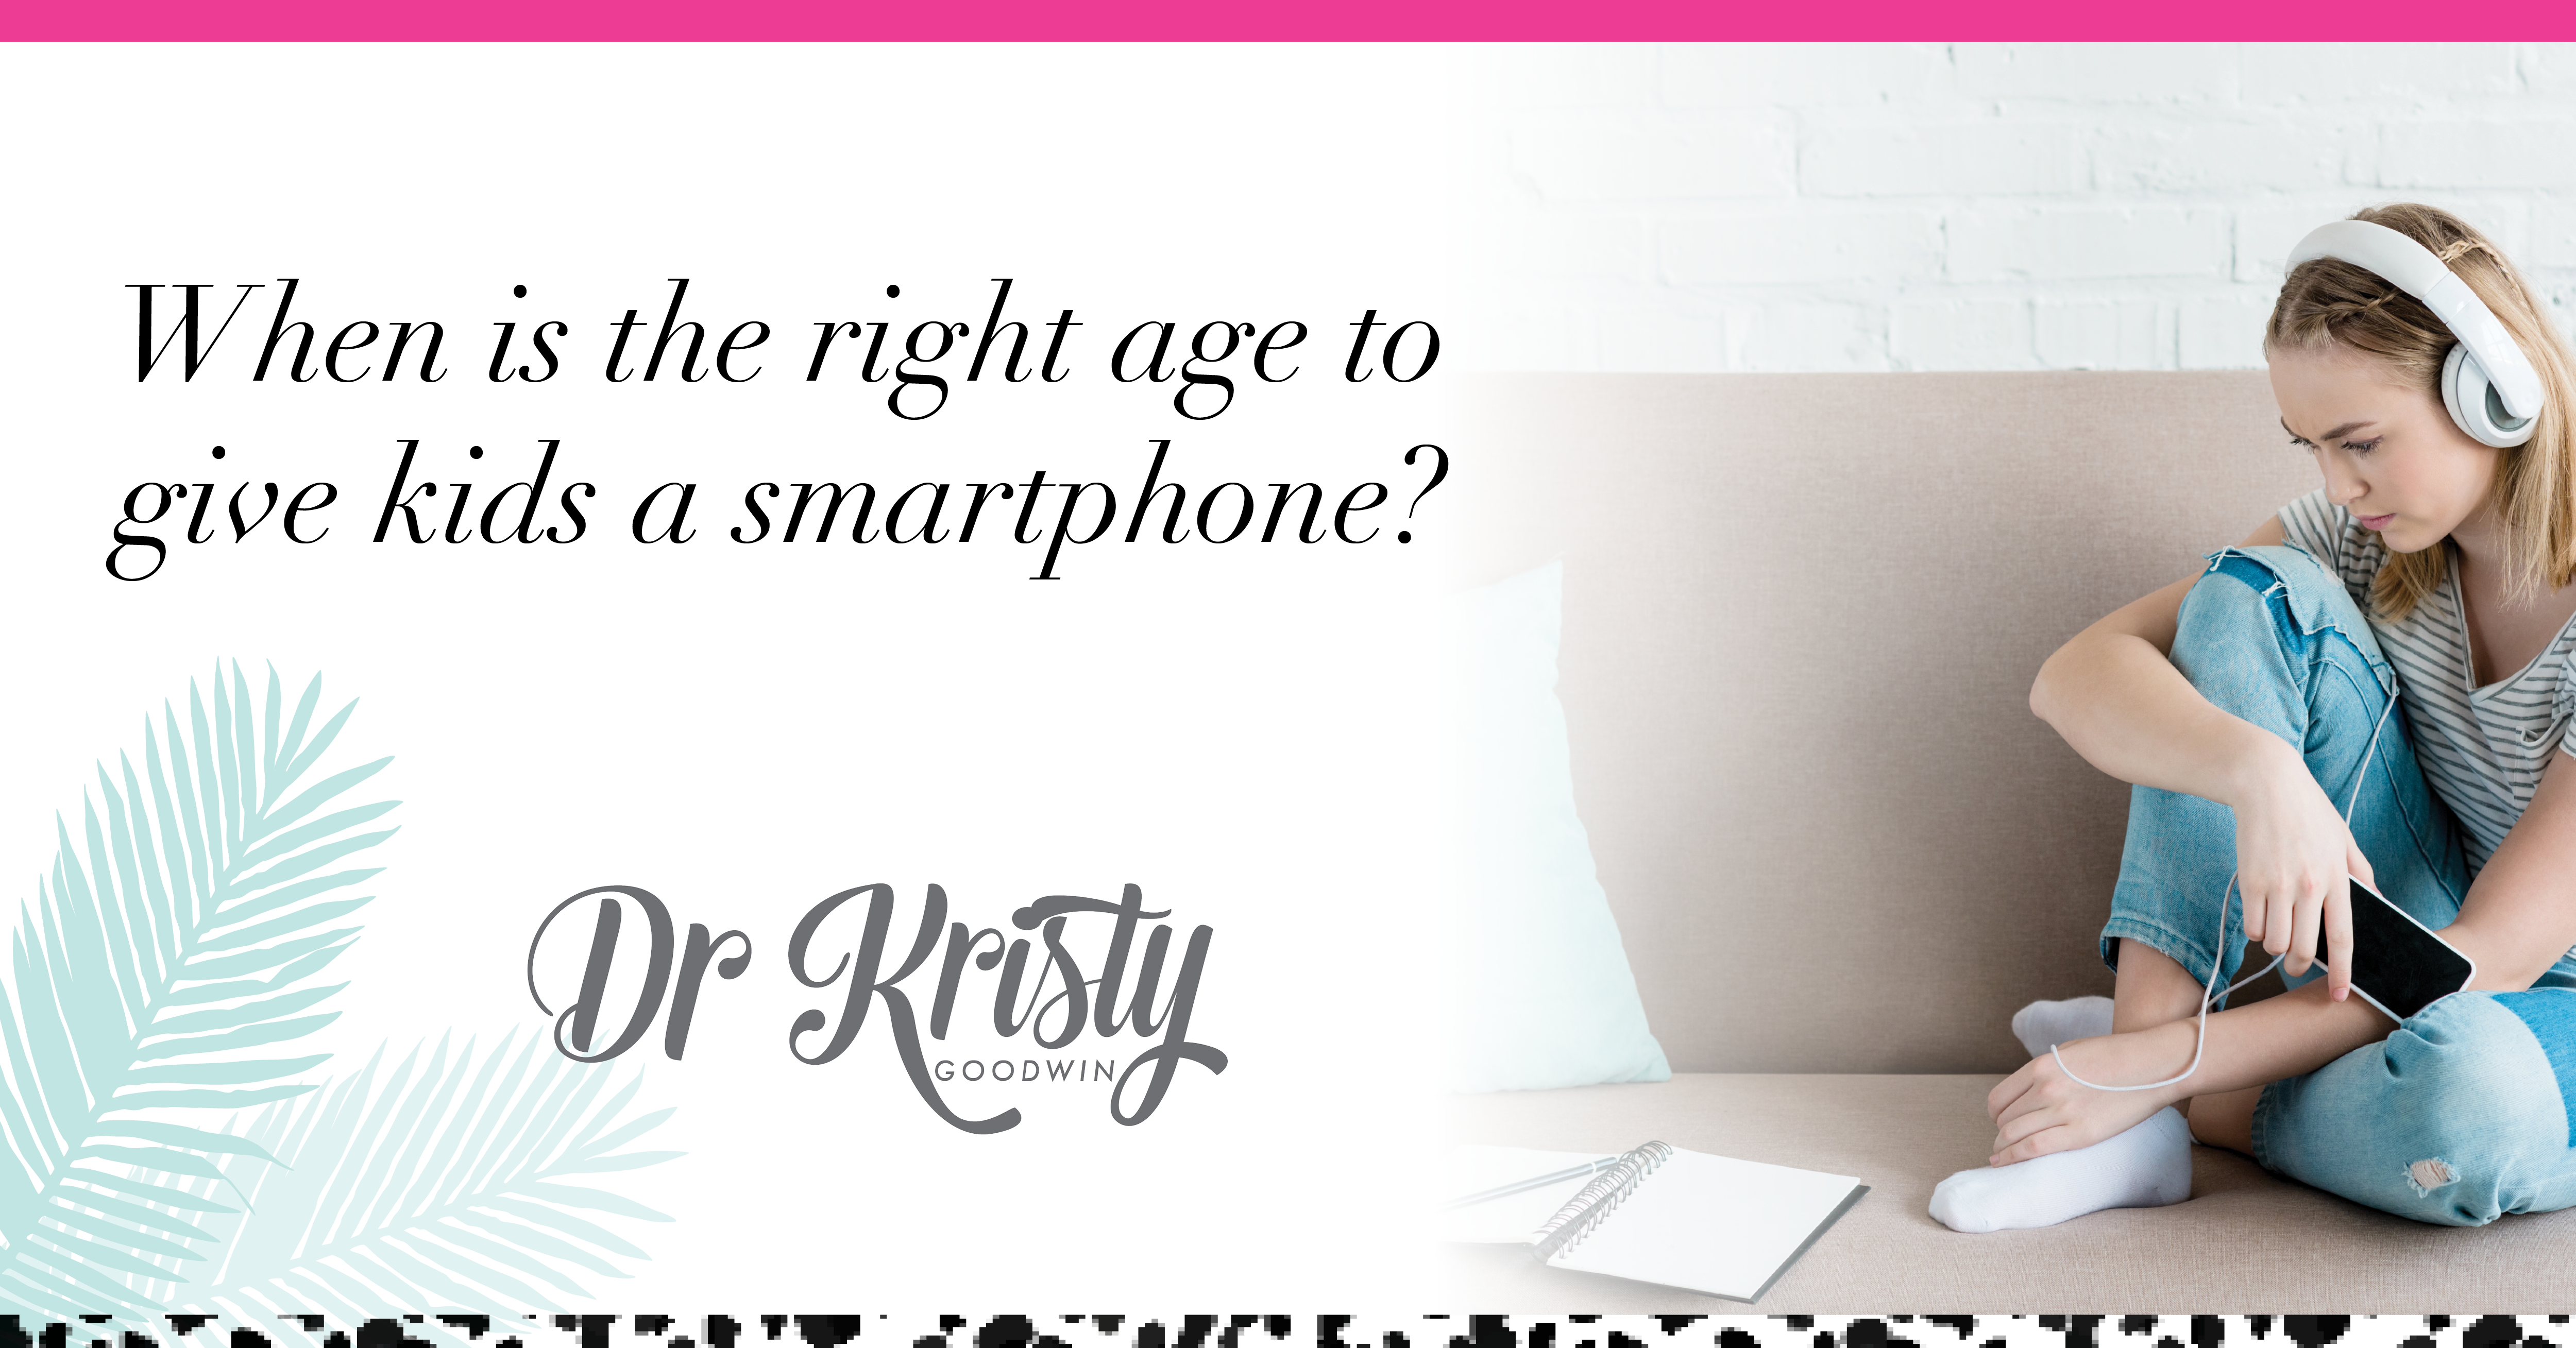 Right age for a smartphone_Dr Kristy Goodwin